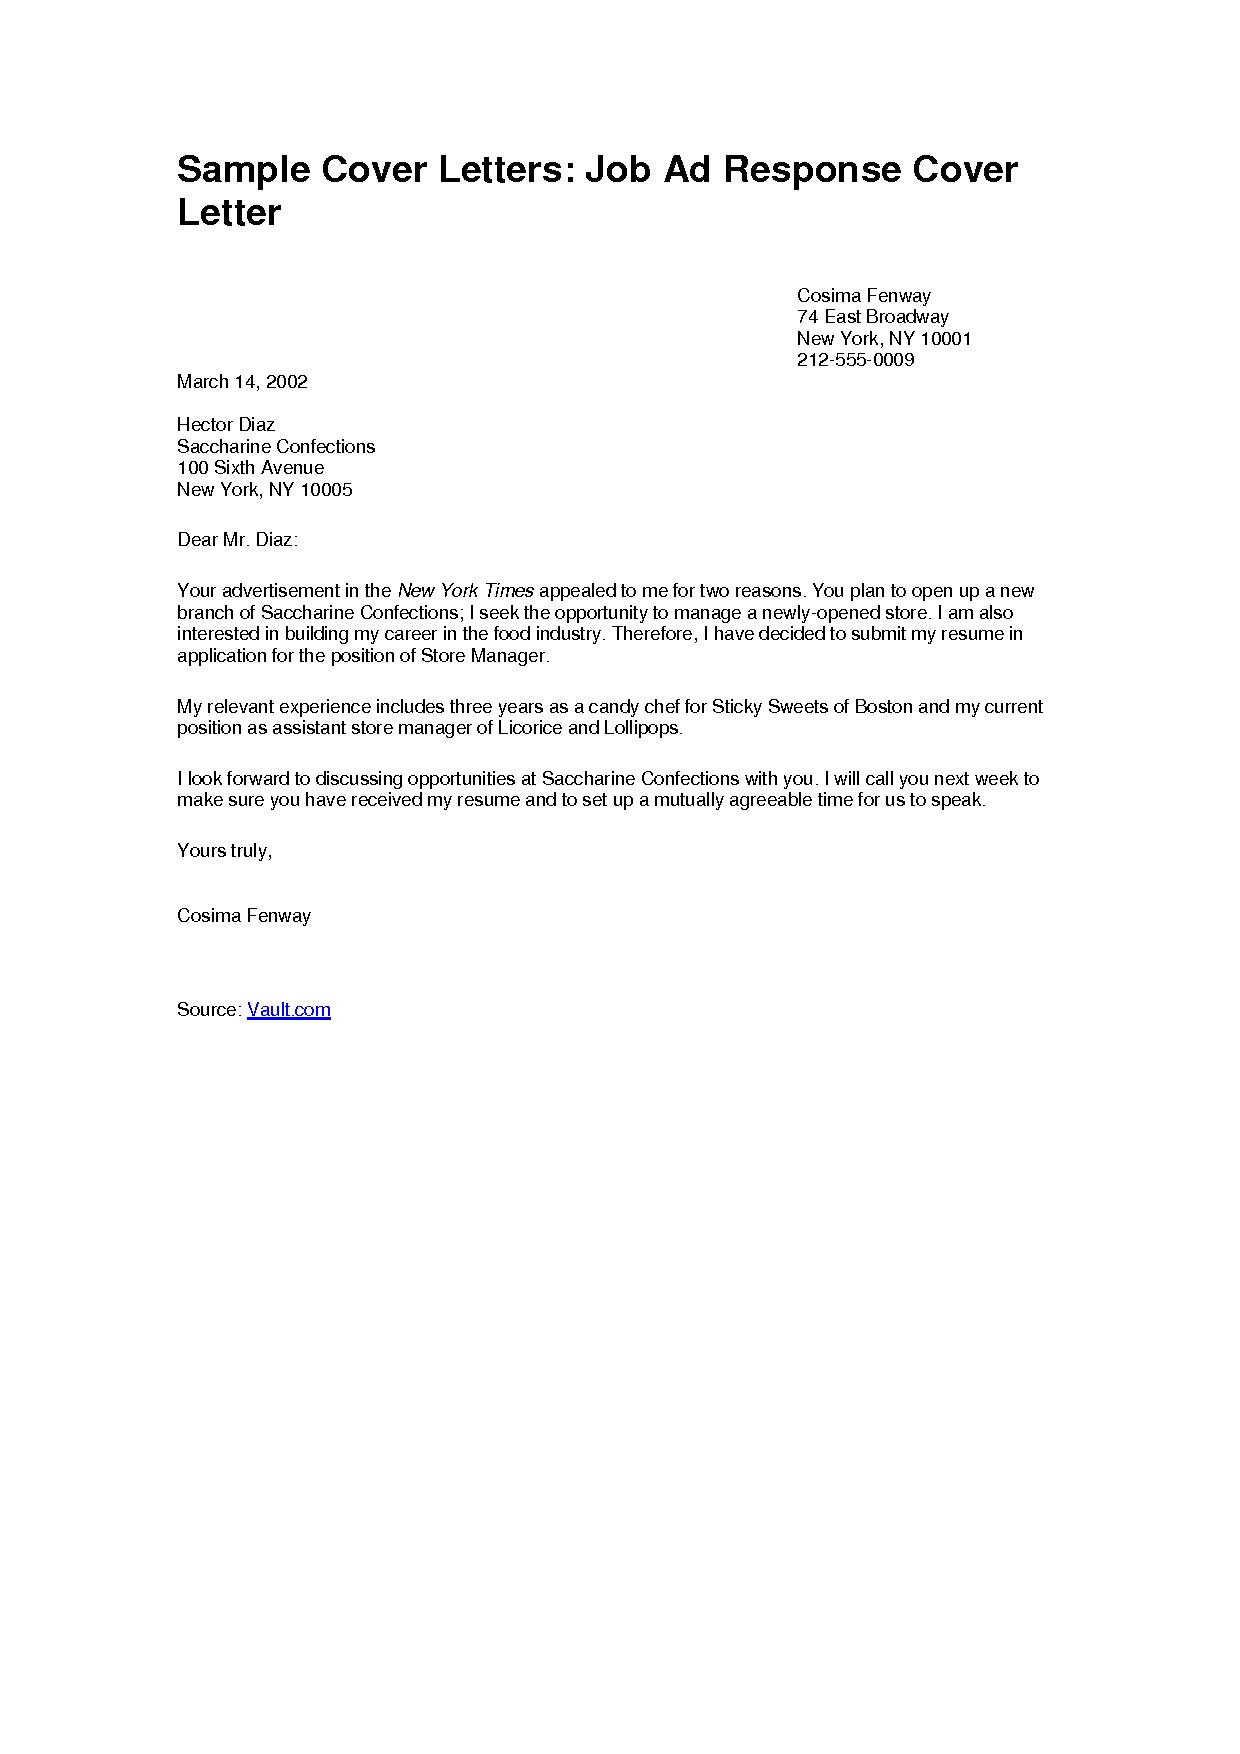 Cover Letter Template for Human Resources - Samples Of Job Cover Letters Acurnamedia